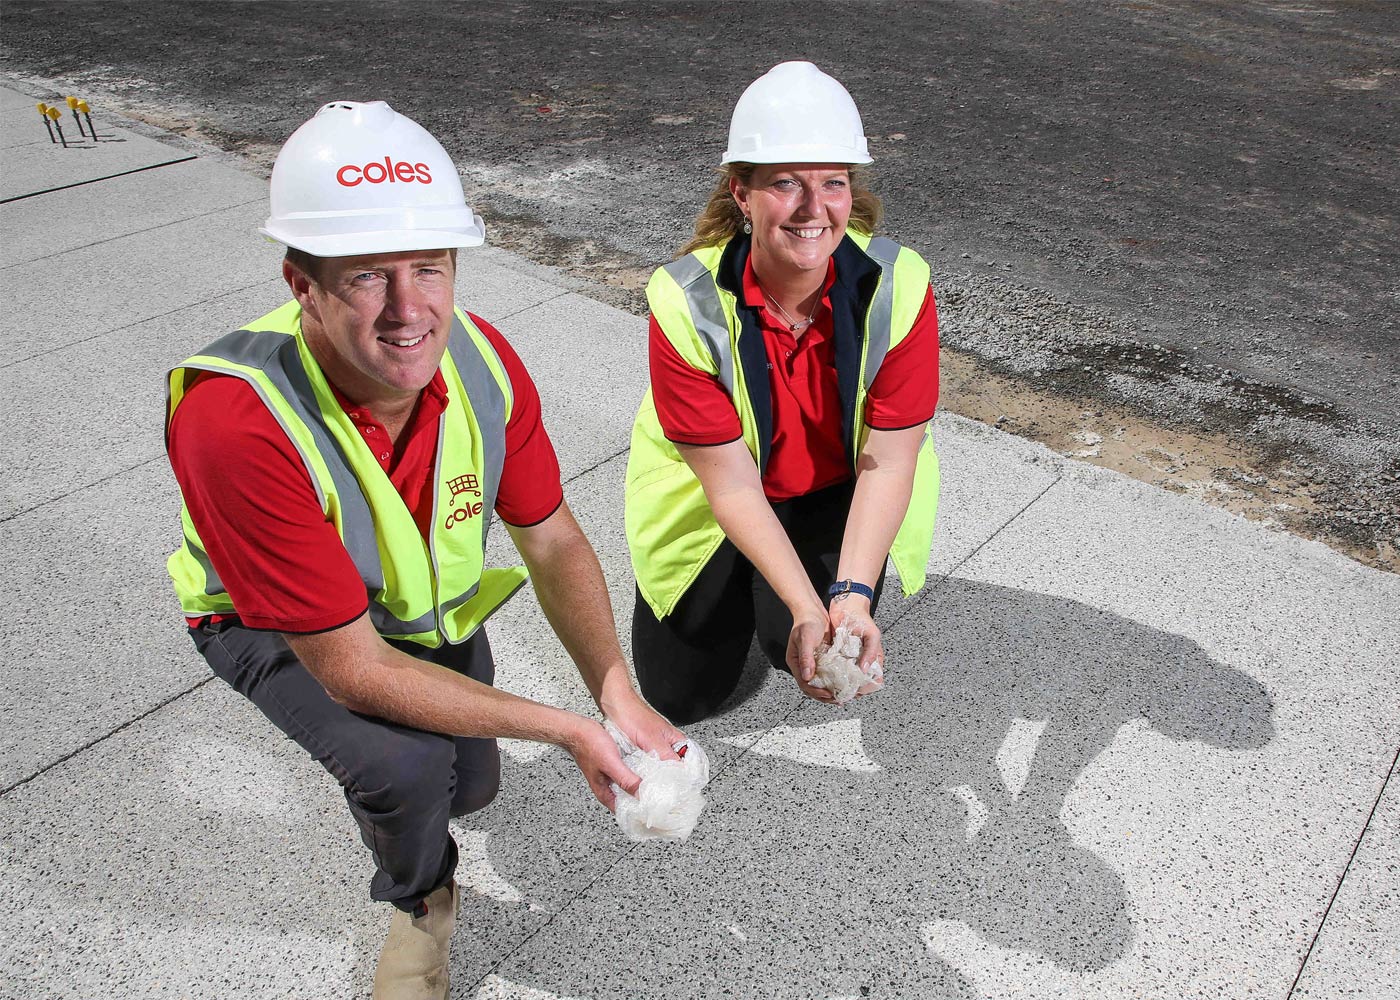 Coles Senior Project Manager Luke Hill with Coles State Construction Manager Victoria Fiona Lloyd at Coles Cobblebank with polyrok